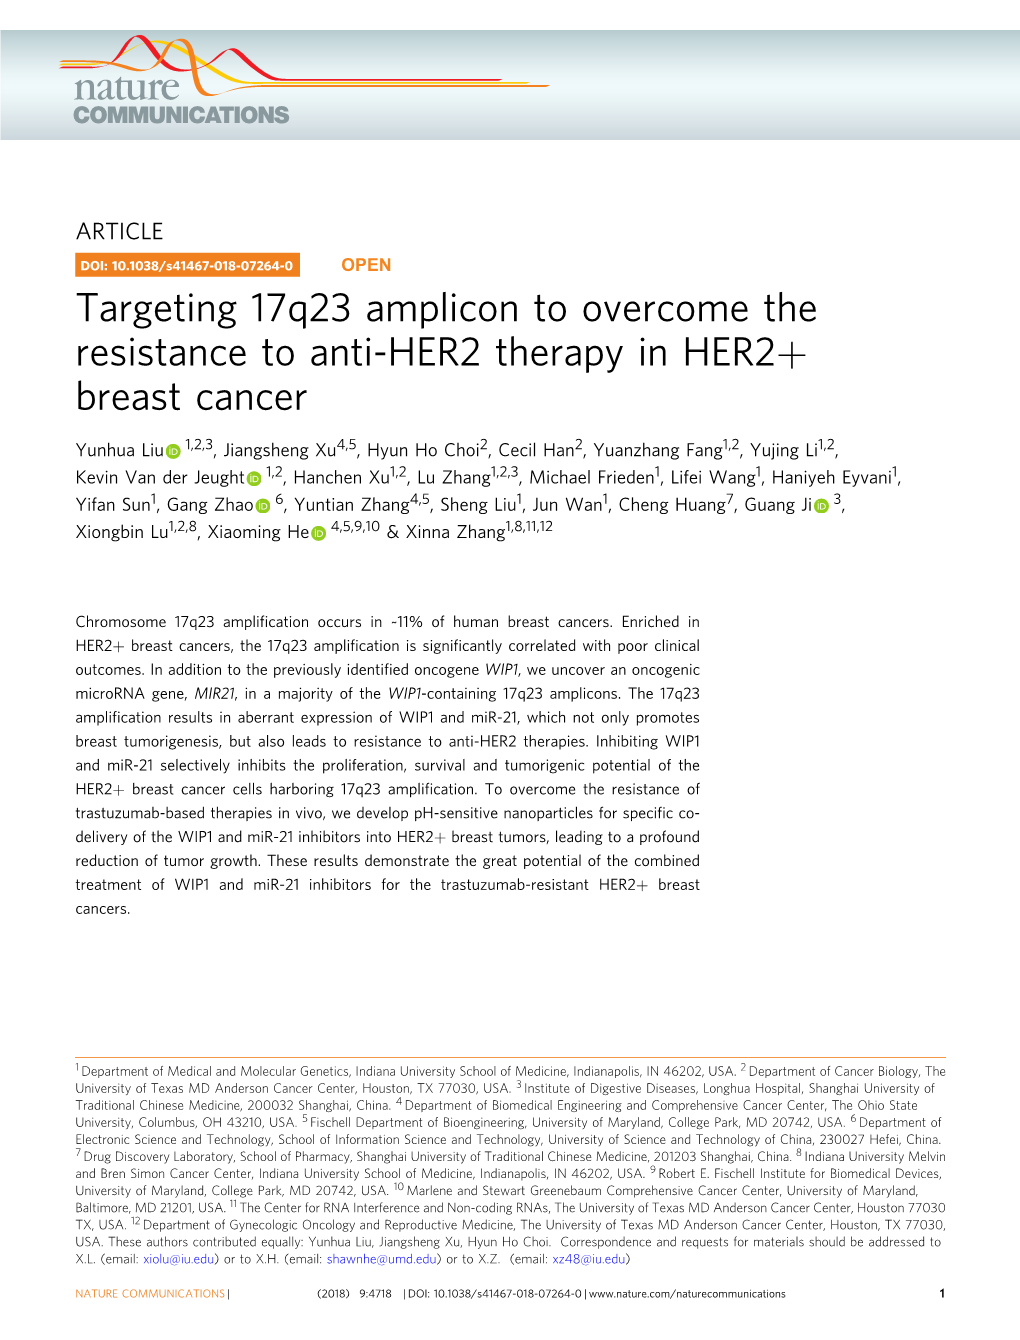 Targeting 17Q23 Amplicon to Overcome the Resistance to Anti-HER2 Therapy in HER2+ Breast Cancer